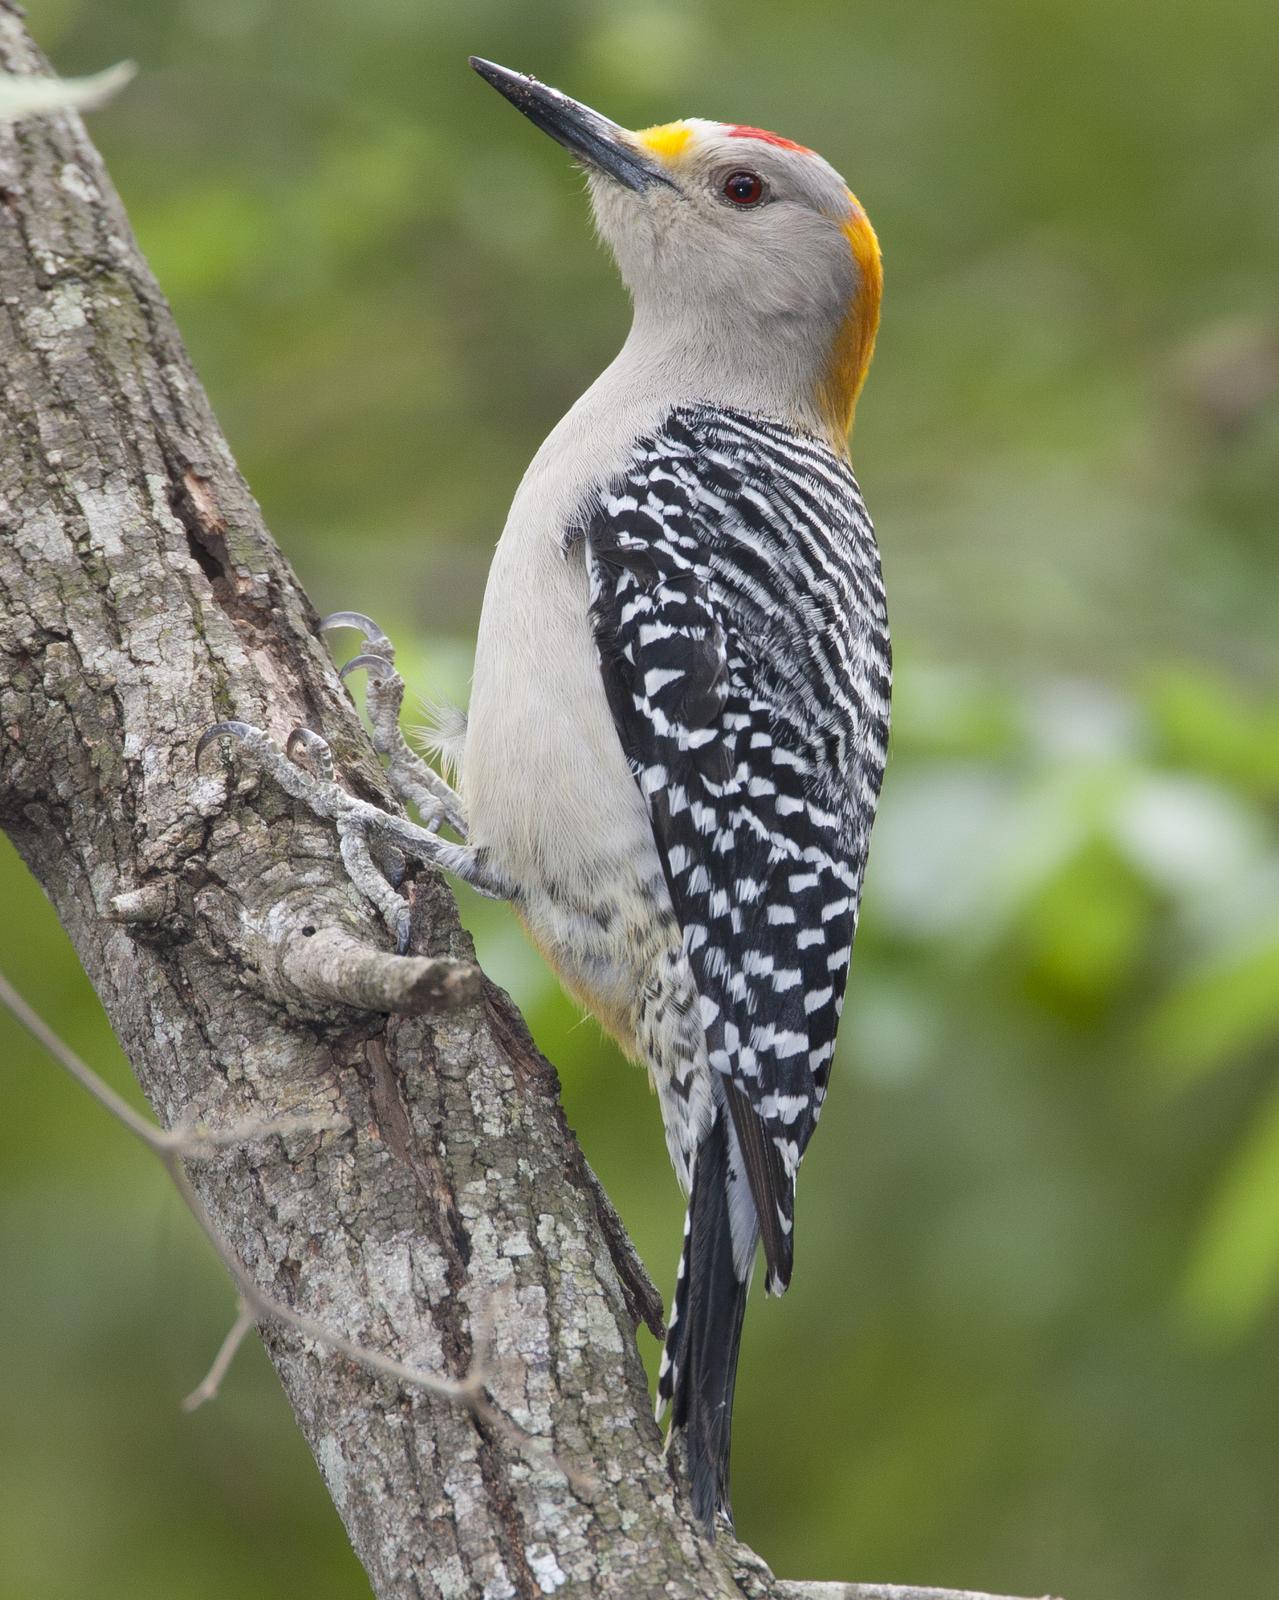 Golden-fronted Woodpecker Photo by Jeff Moore